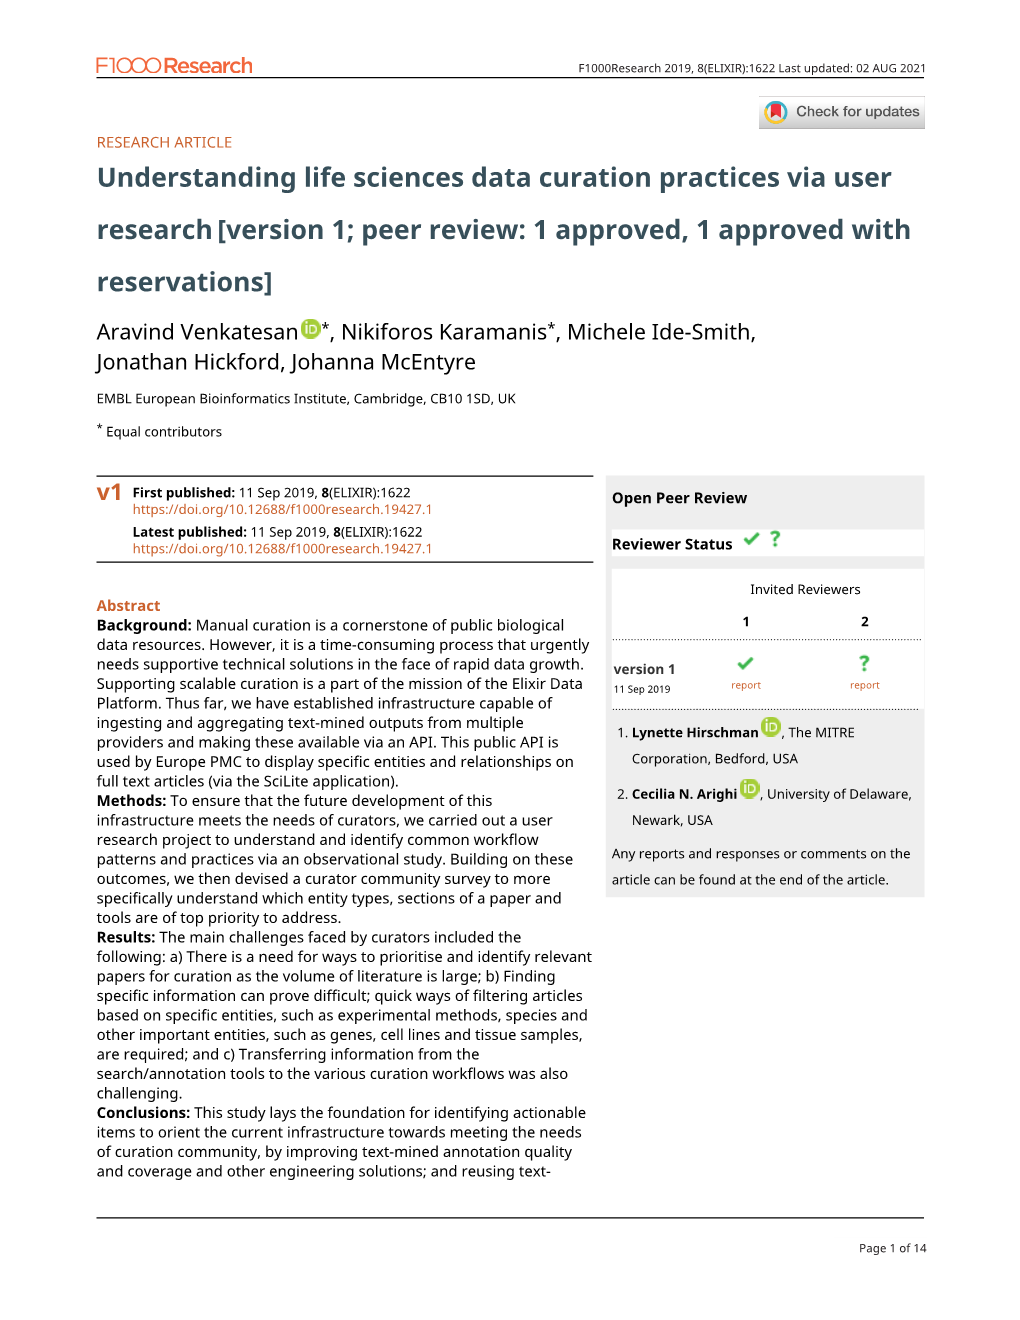 Understanding Life Sciences Data Curation Practices Via User Research [Version 1; Peer Review: 1 Approved, 1 Approved with Reservations]